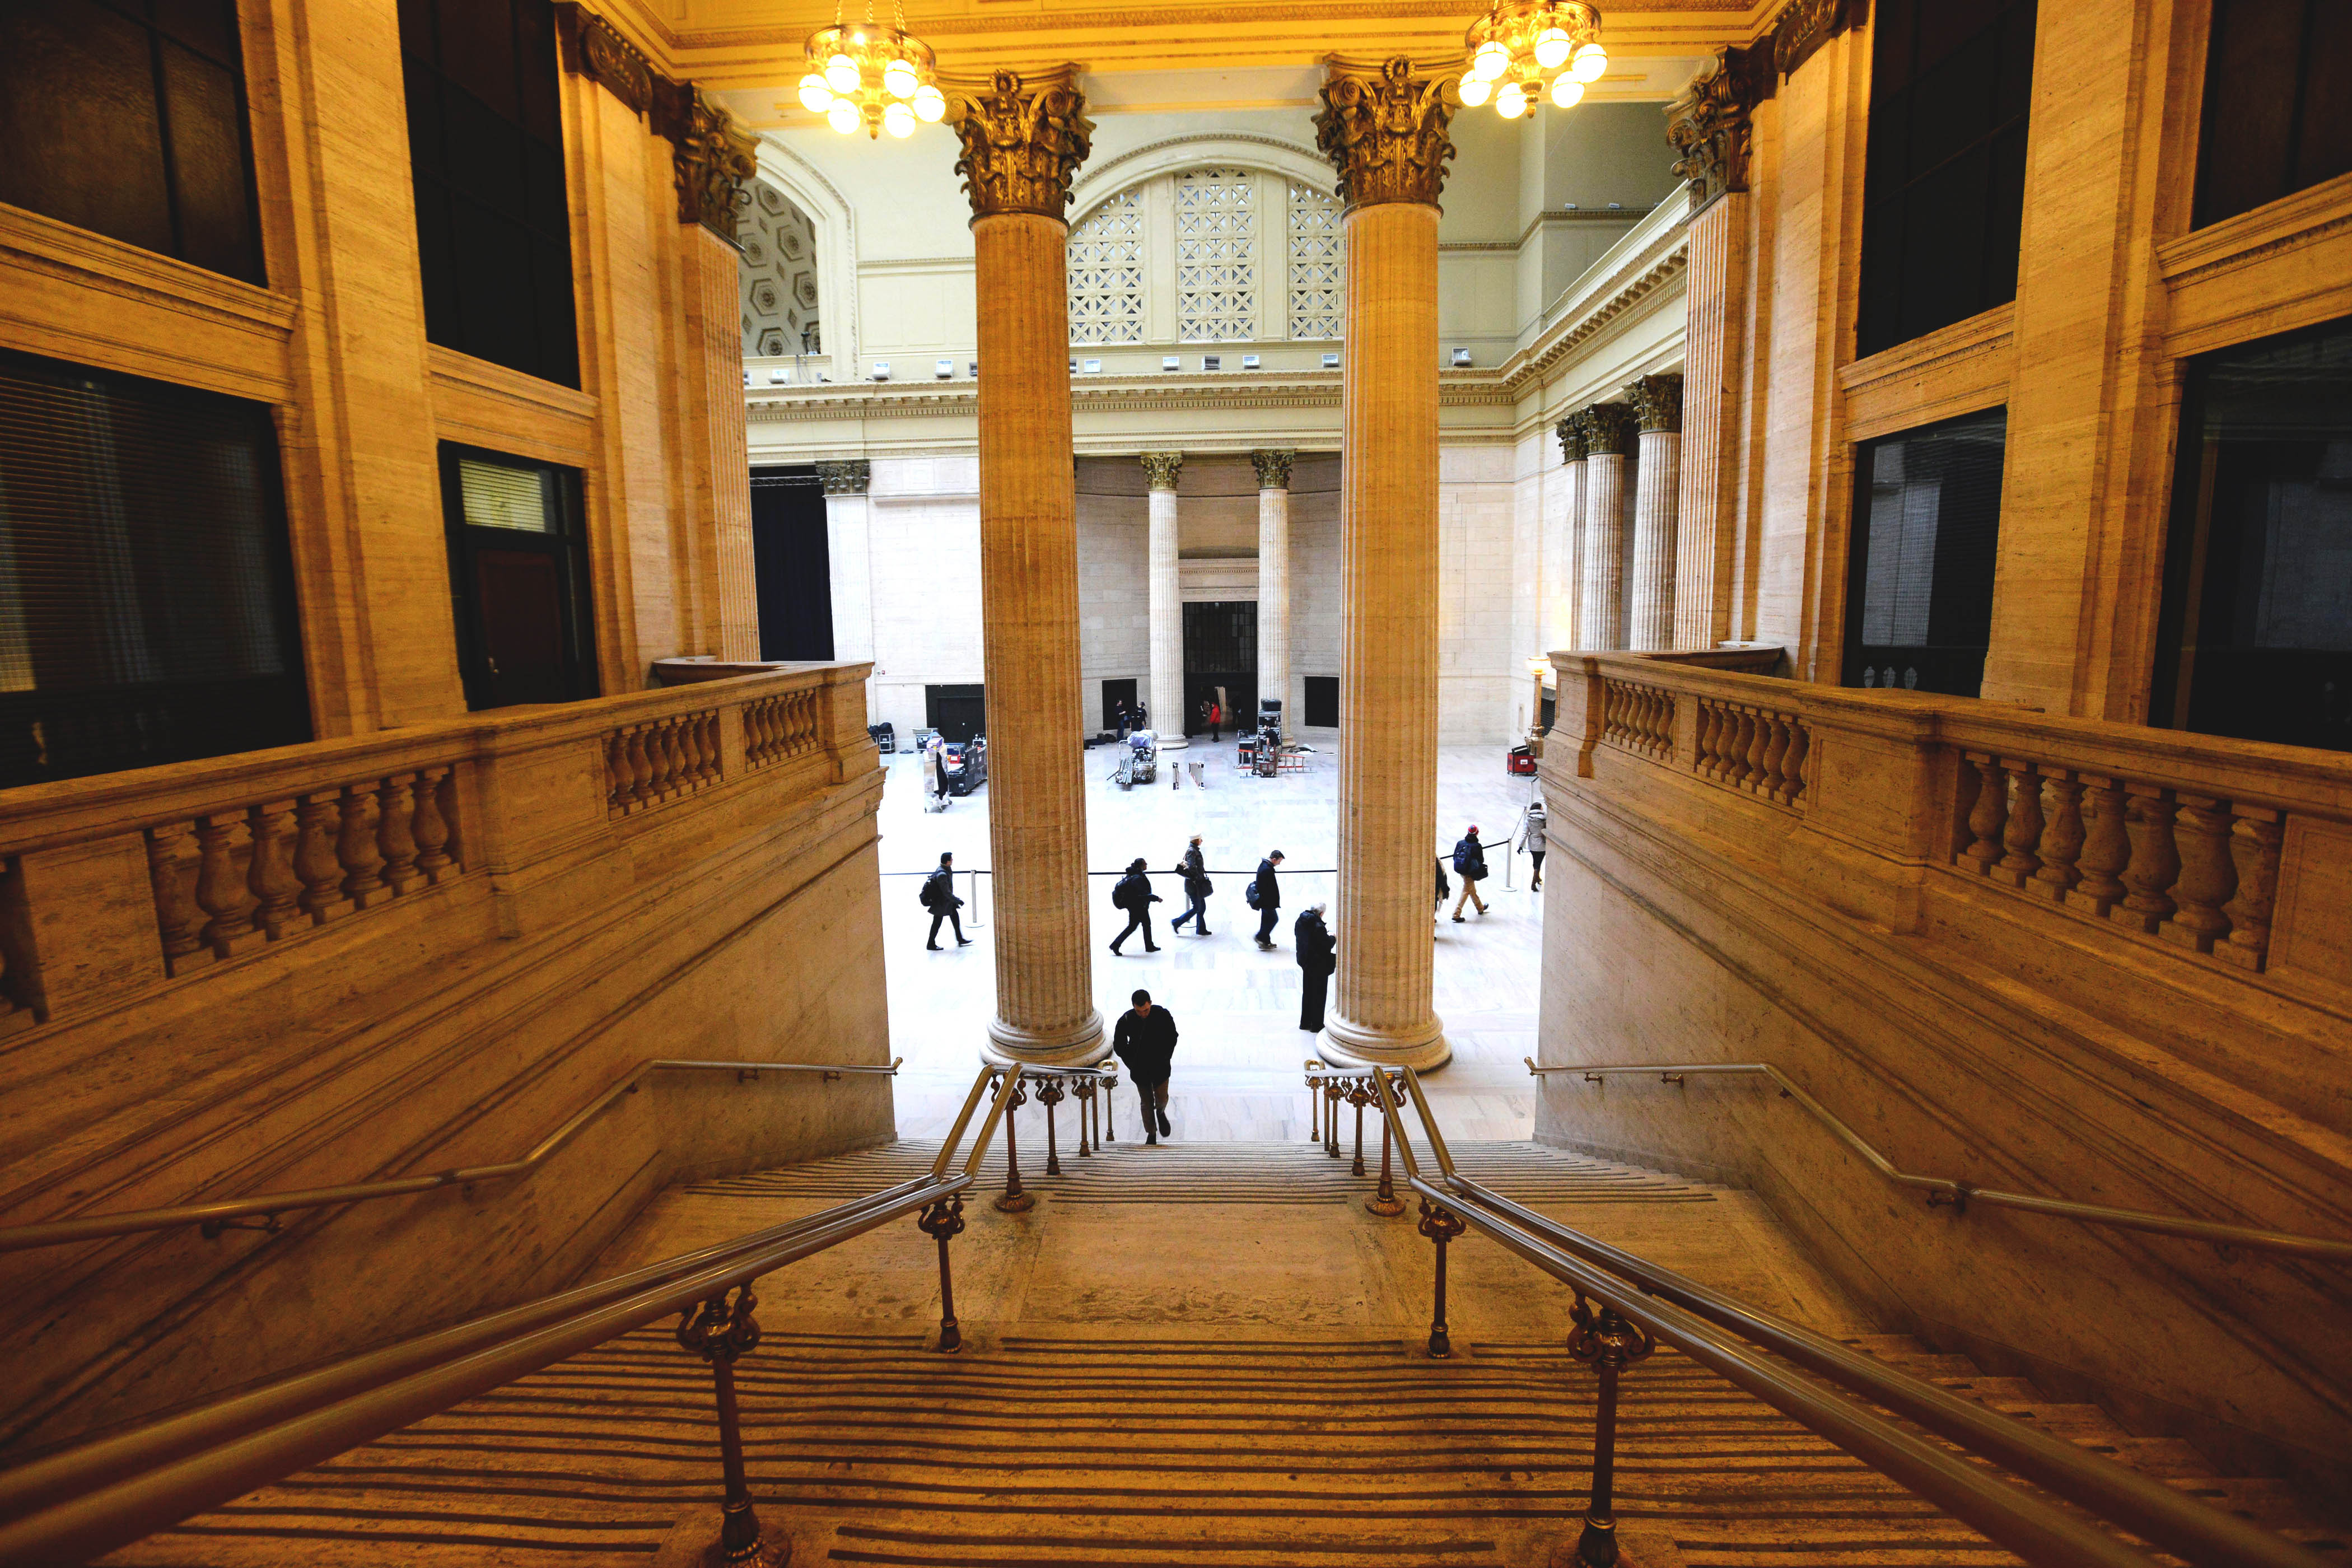 View inside Union Station Chicago of the tall ceilings above a staircase in the main hall with tall columns